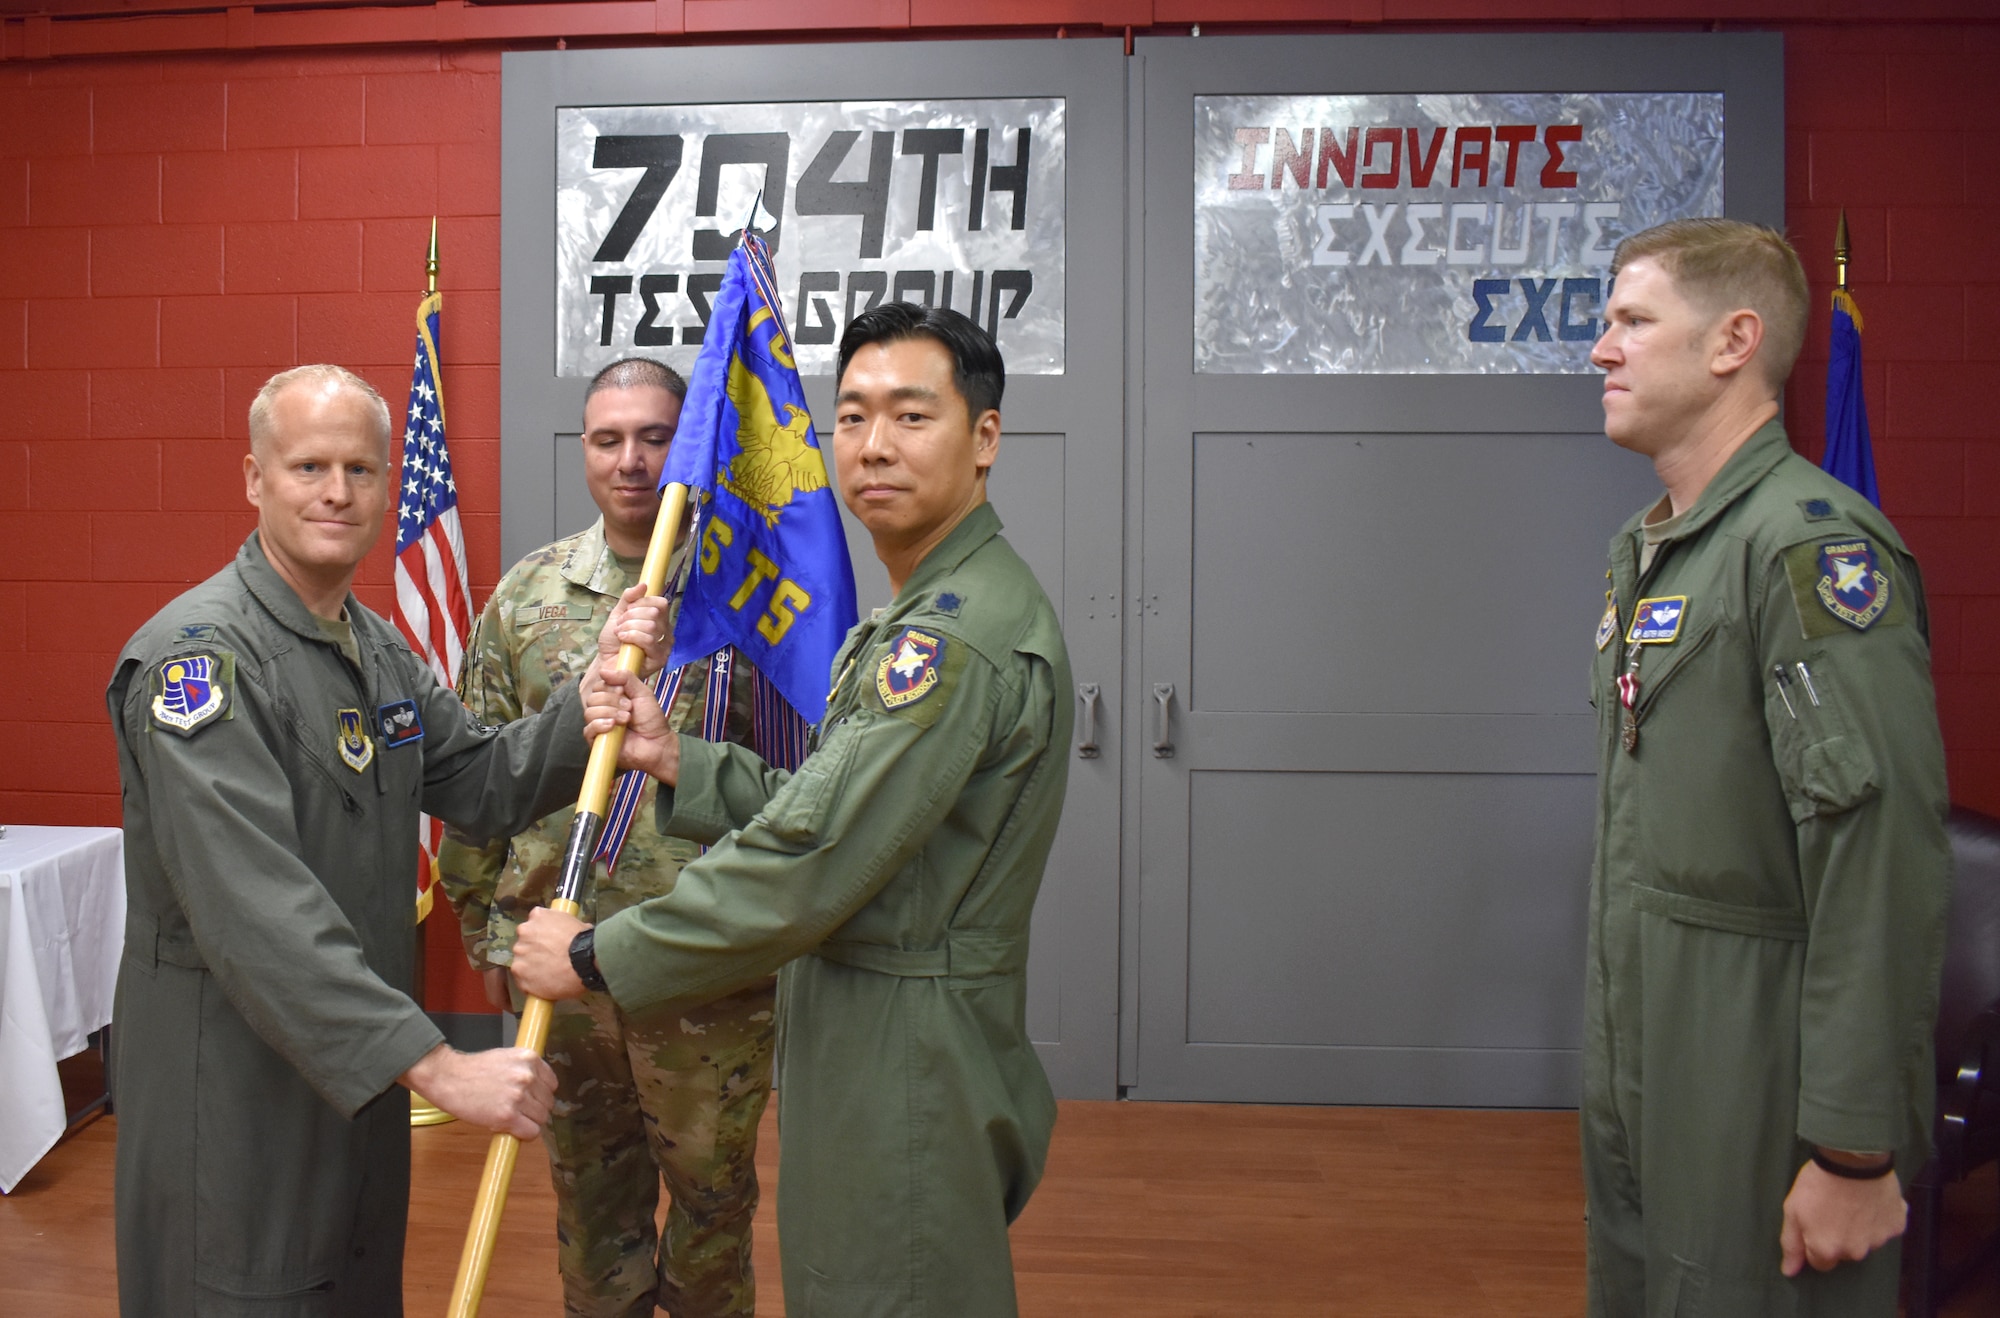 Col. Darren Wees, left, 704th Test Group Commander, hands the guidon to Lt. Col. Brian Davis charging him with command of the 746th Test Squadron during a Change of Command Ceremony at Holloman Air Force Base, New Mexico, June 8, 2022.